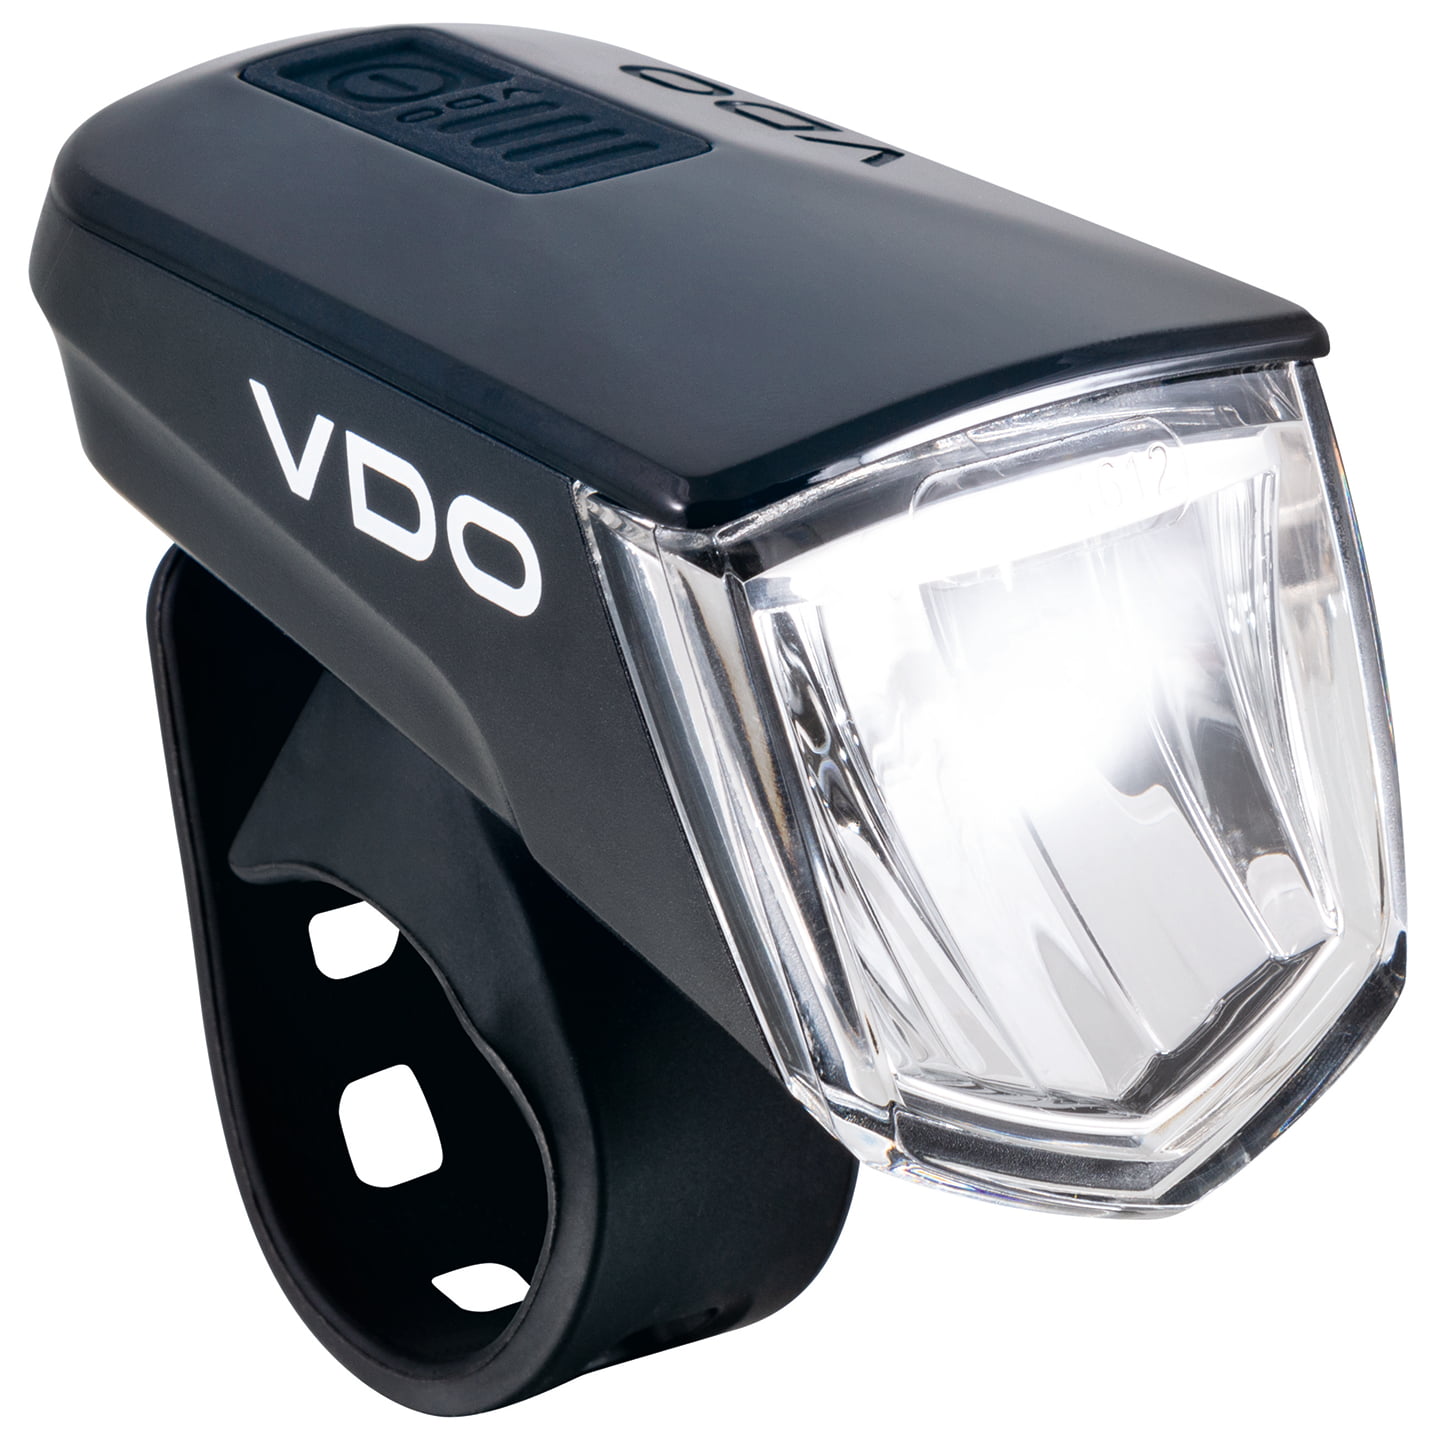 VDO ECO Light M60 Front Light Front Light, Bicycle light, Bike accessories